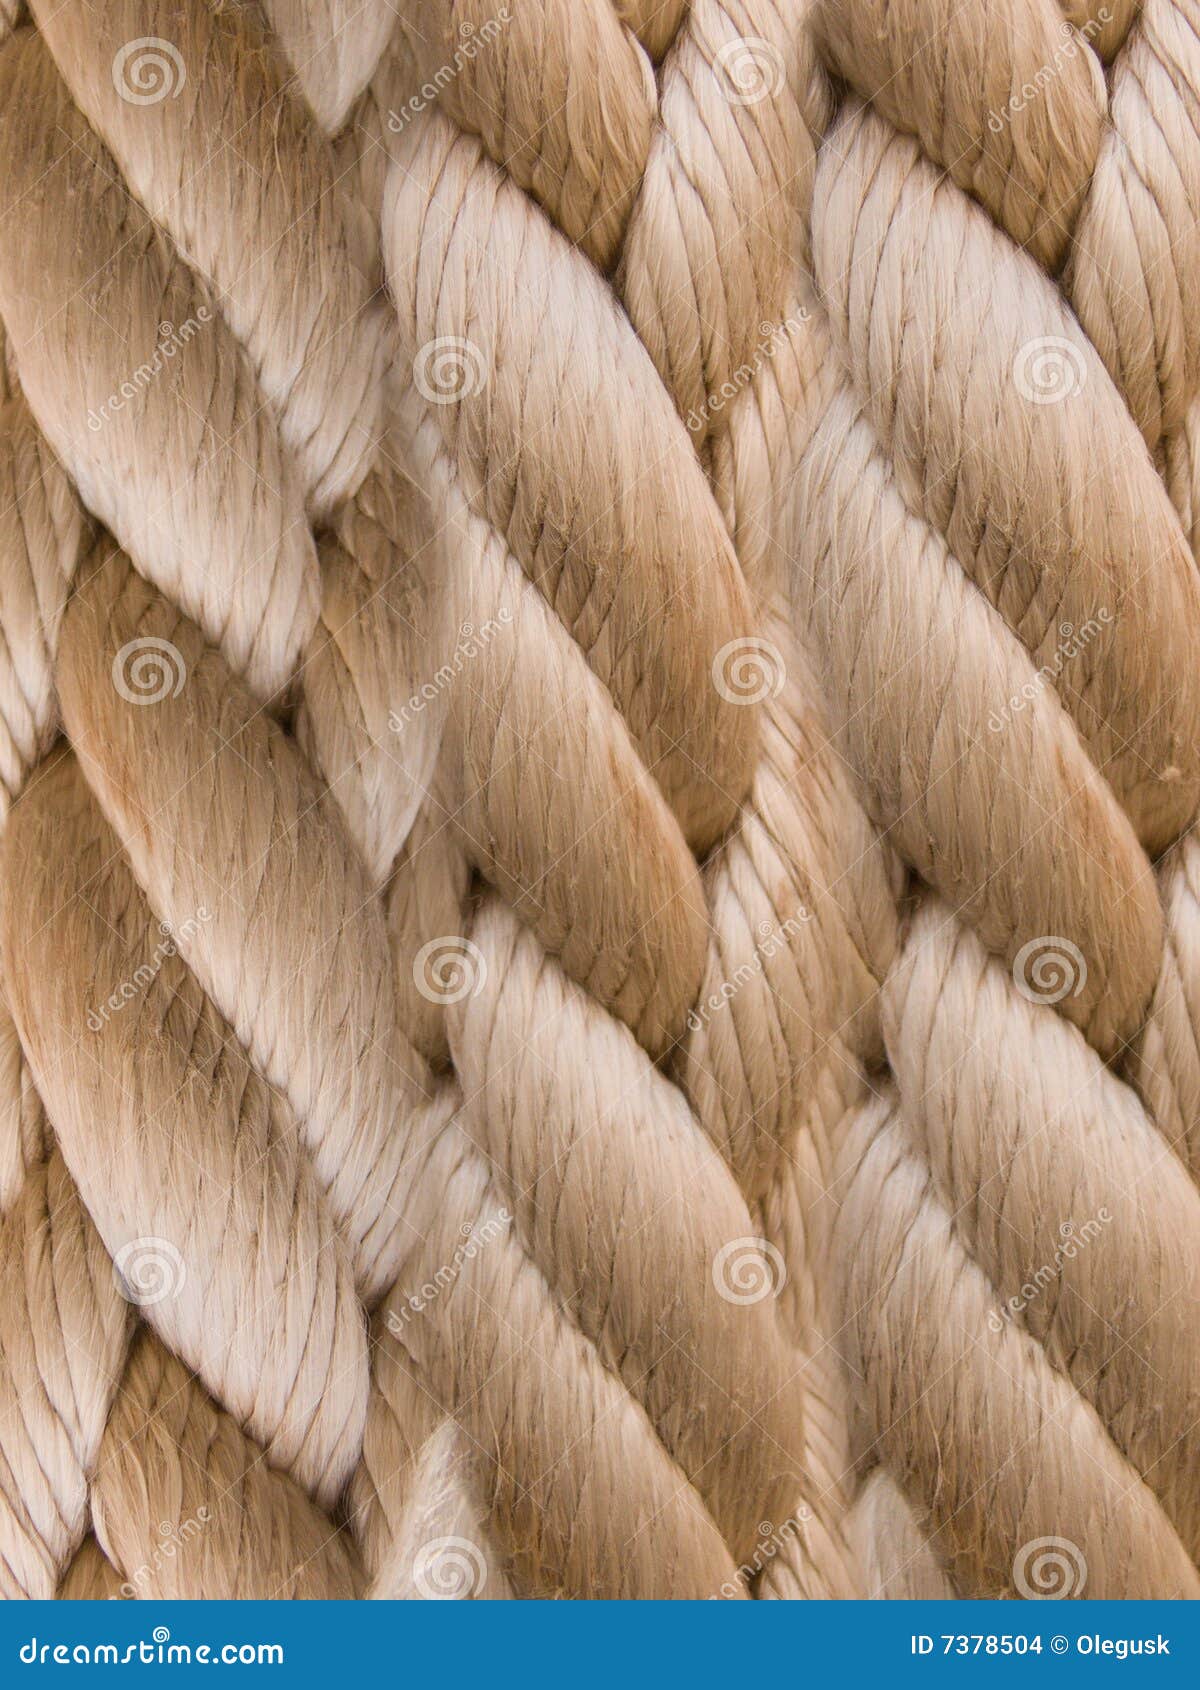 Rope structure stock photo. Image of thread, cellulose - 7378504